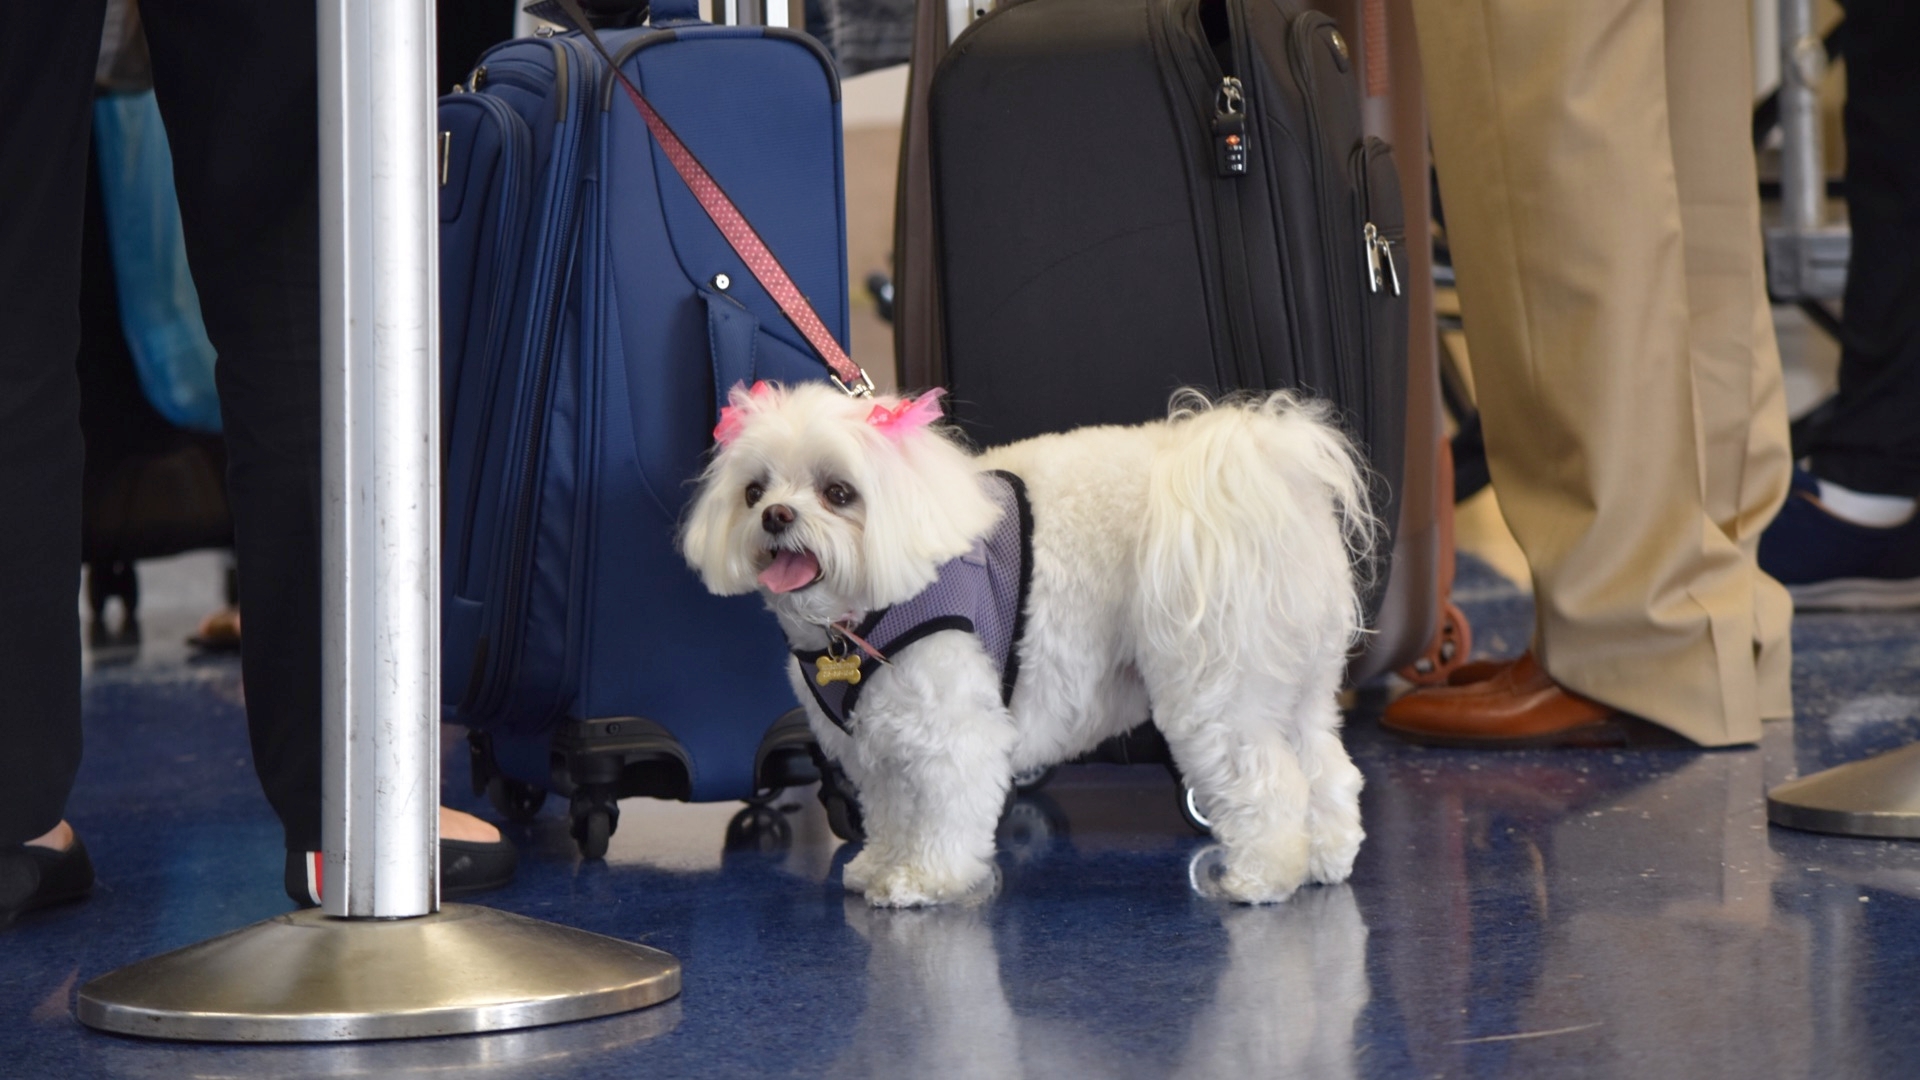 Eleven (11) Things You Can Do To Make Travel Safer For You And Your Pet